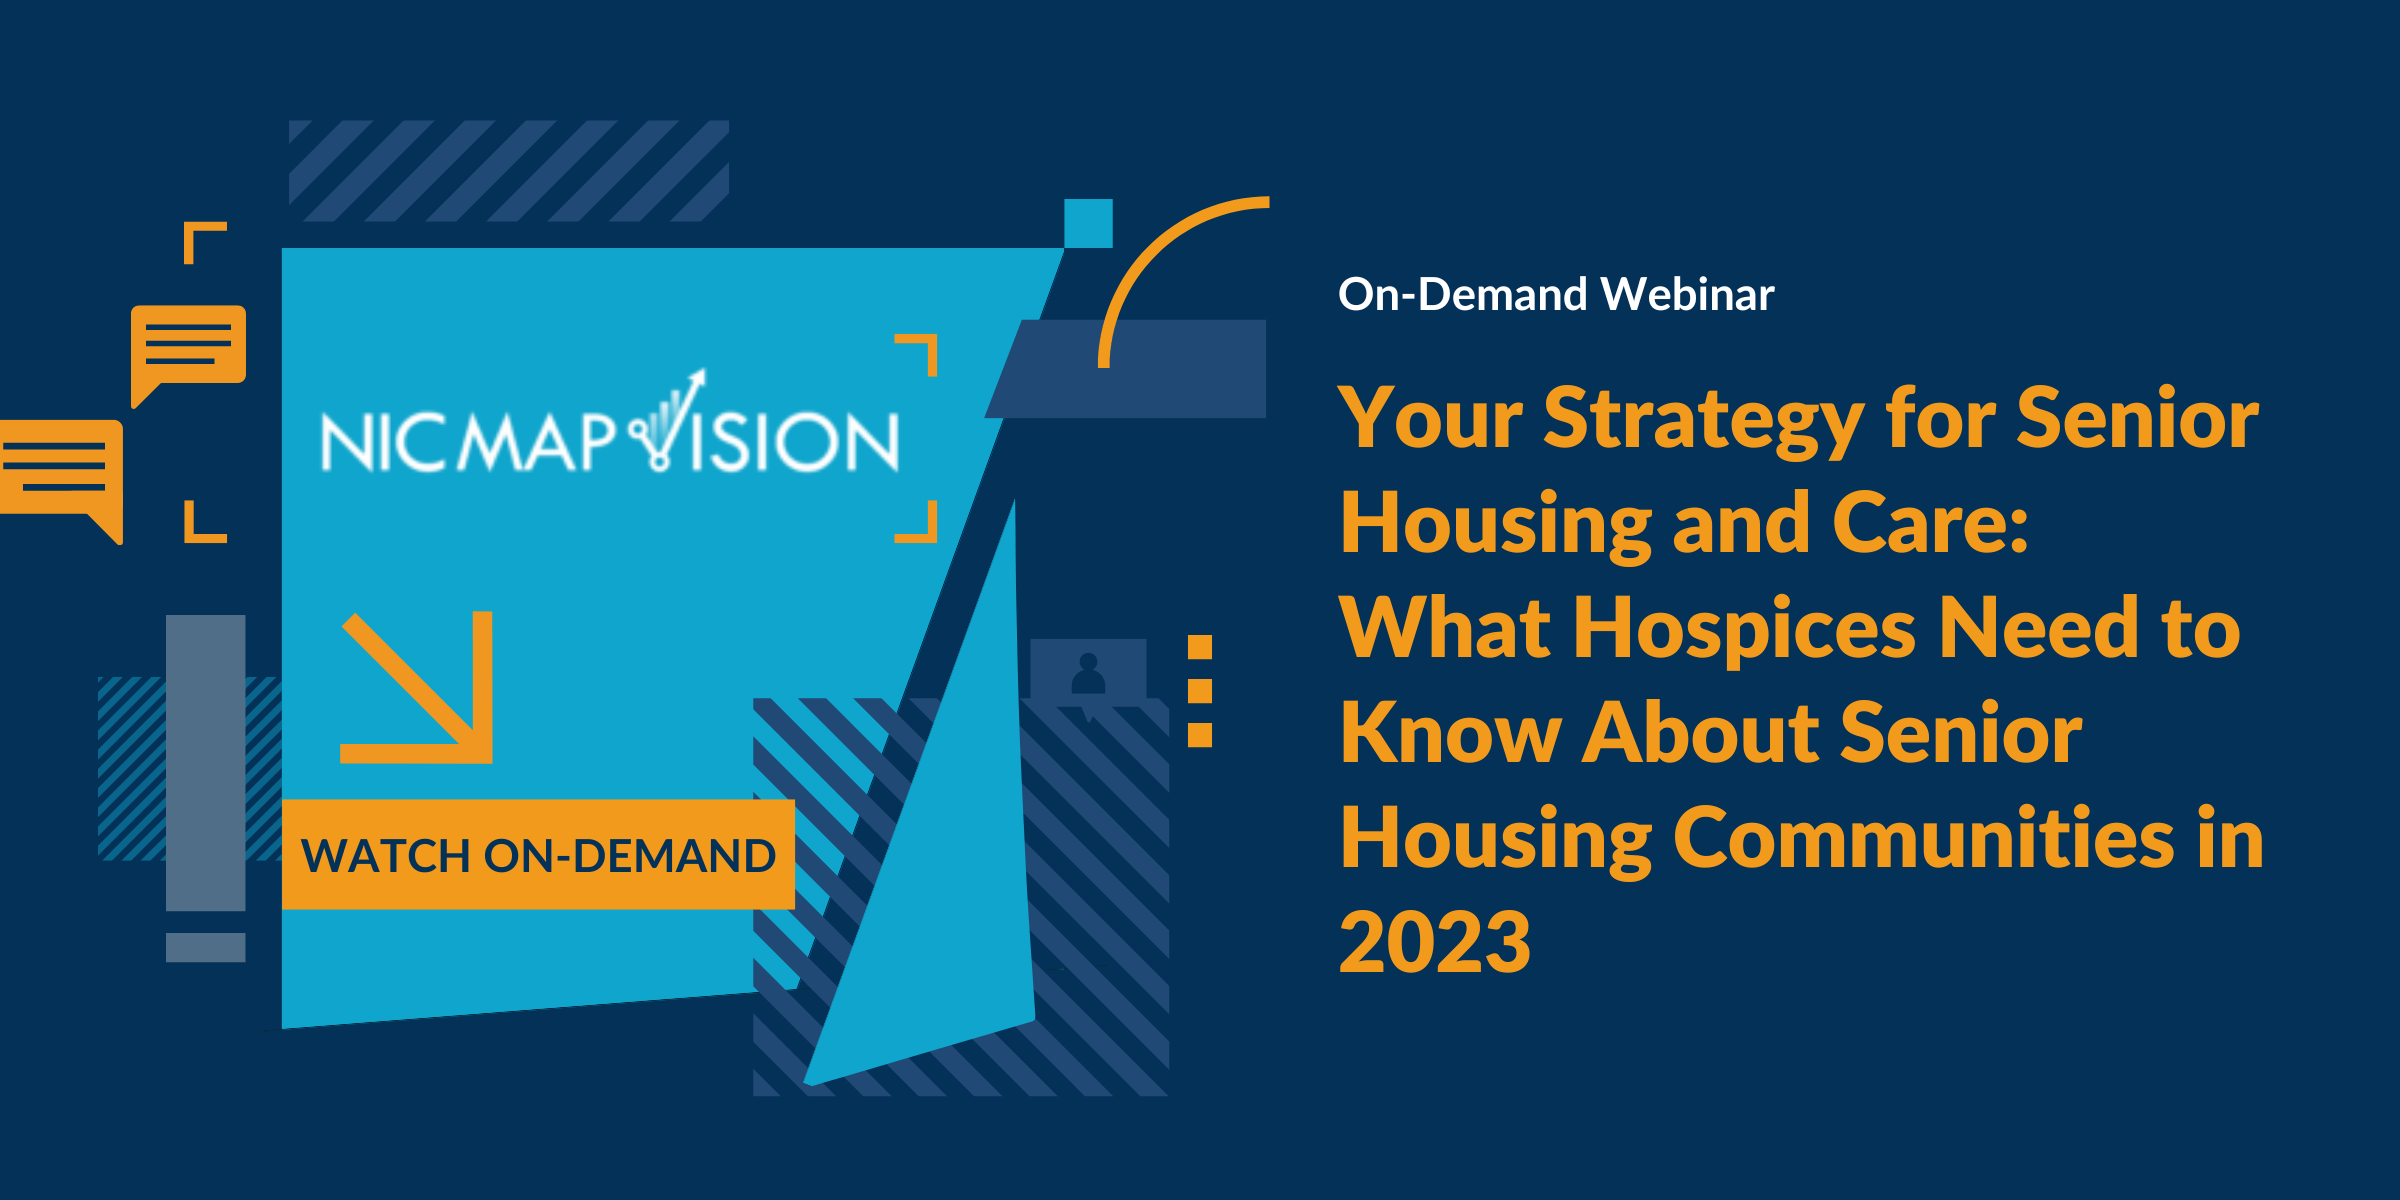 Your Strategy for Senior Housing and Care: What Hospices Need to Know About Senior Housing Communities in 2023